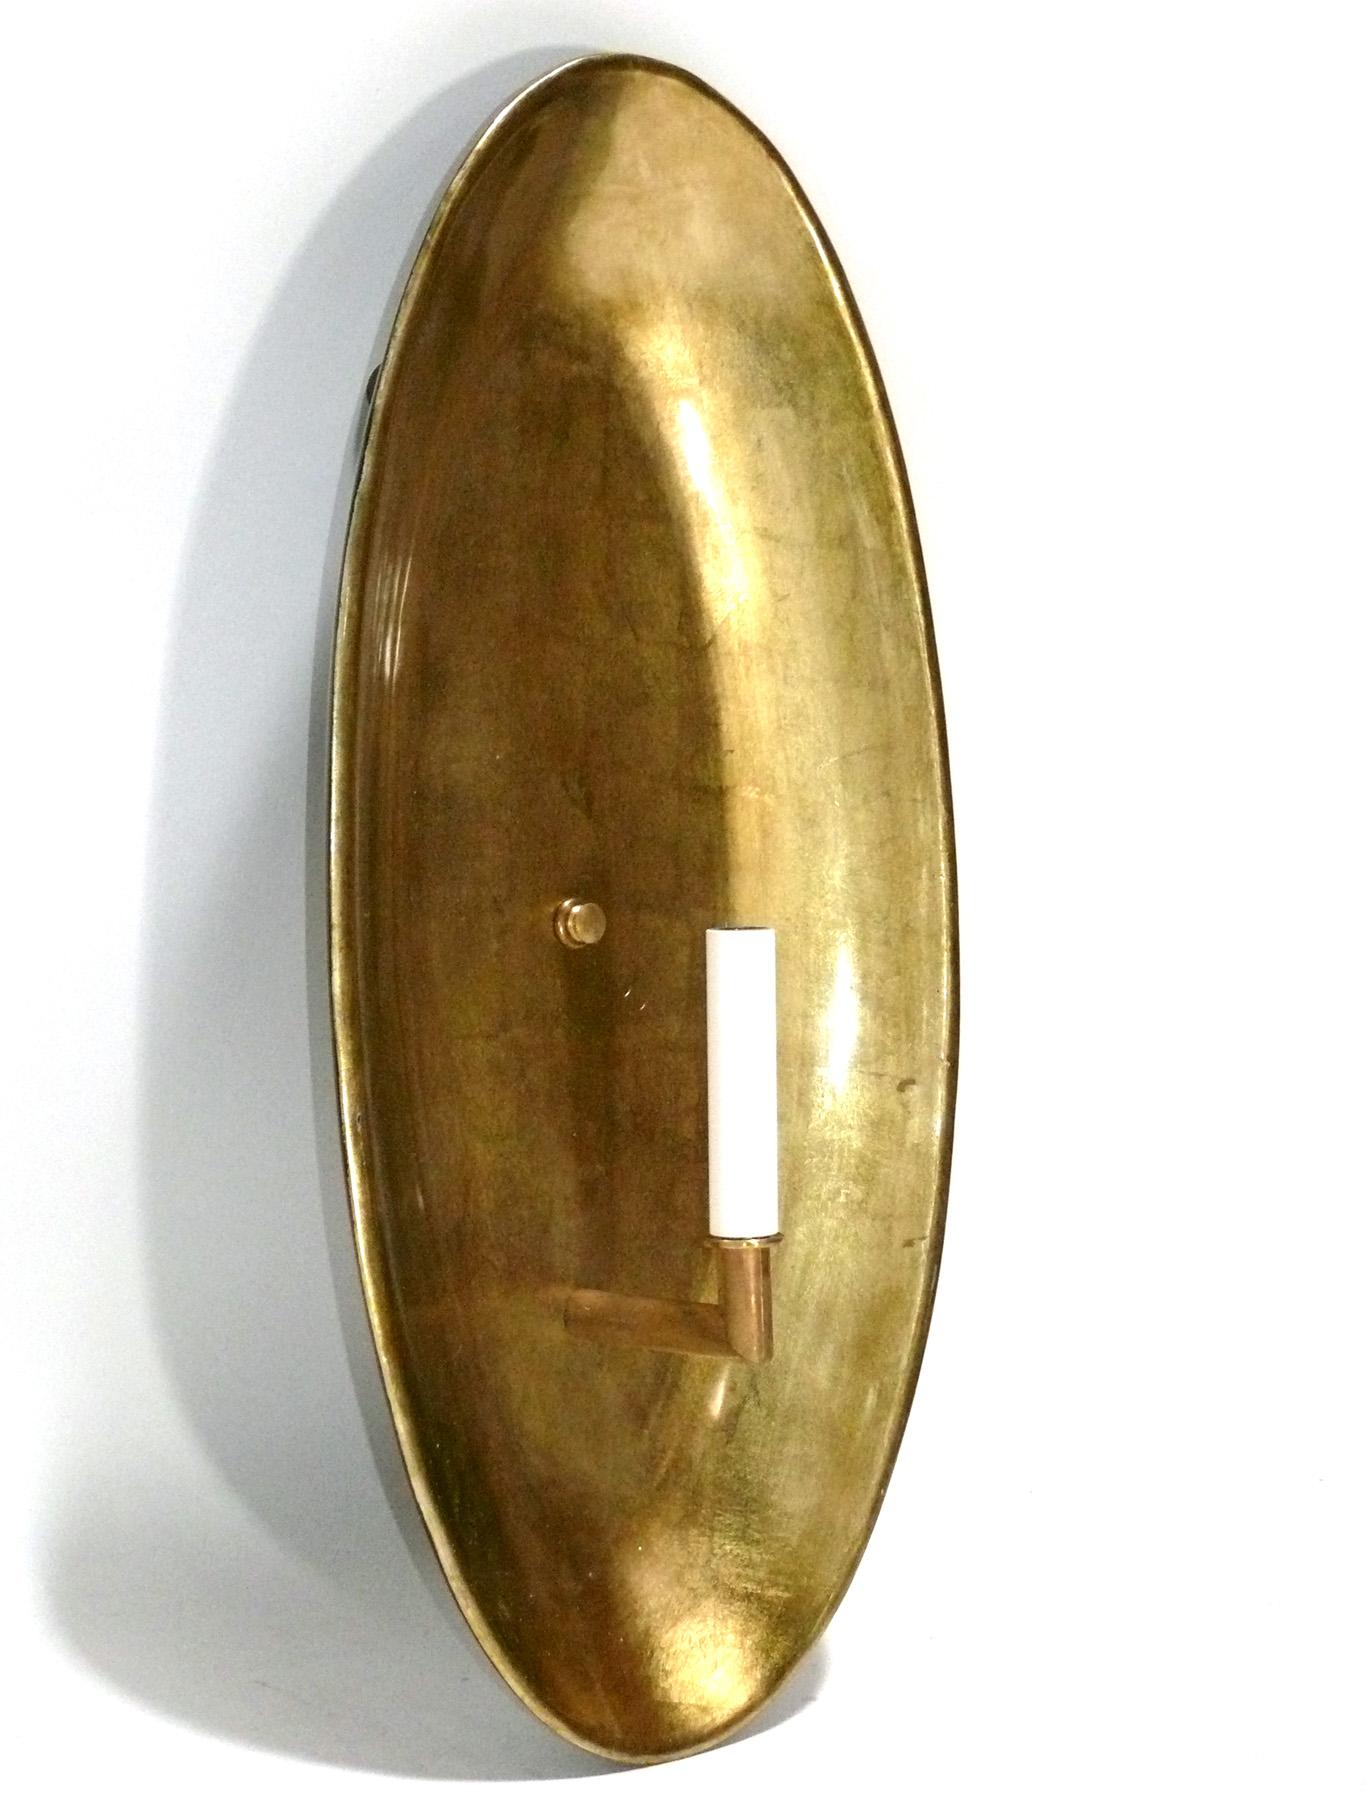 Sculptural gilt wood sconce, in the manner of Herve van der Straeten, Italy, circa 1960s. It has been rewired and is ready to use. We only have a single sconce.